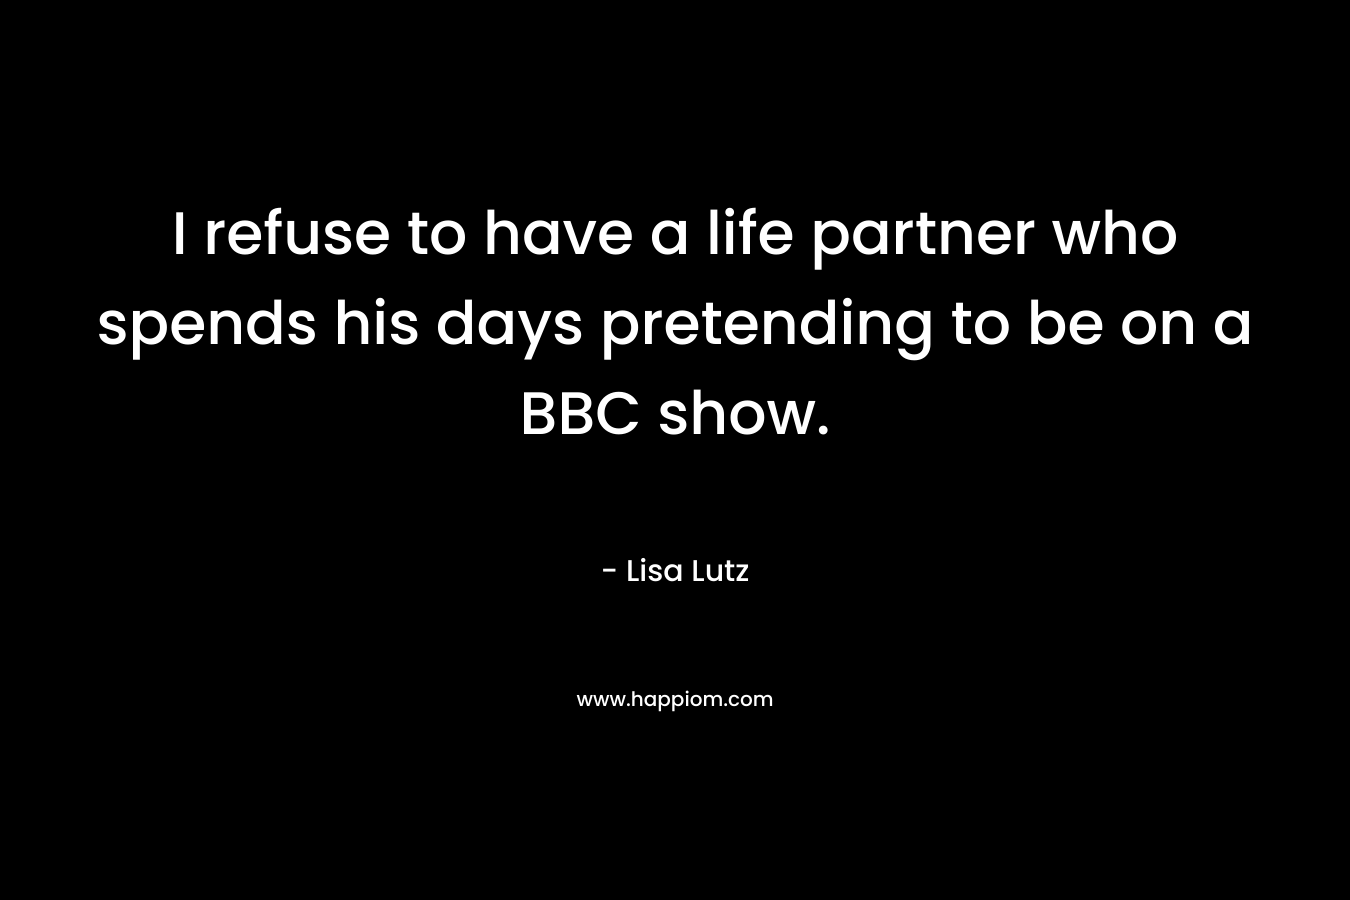 I refuse to have a life partner who spends his days pretending to be on a BBC show.